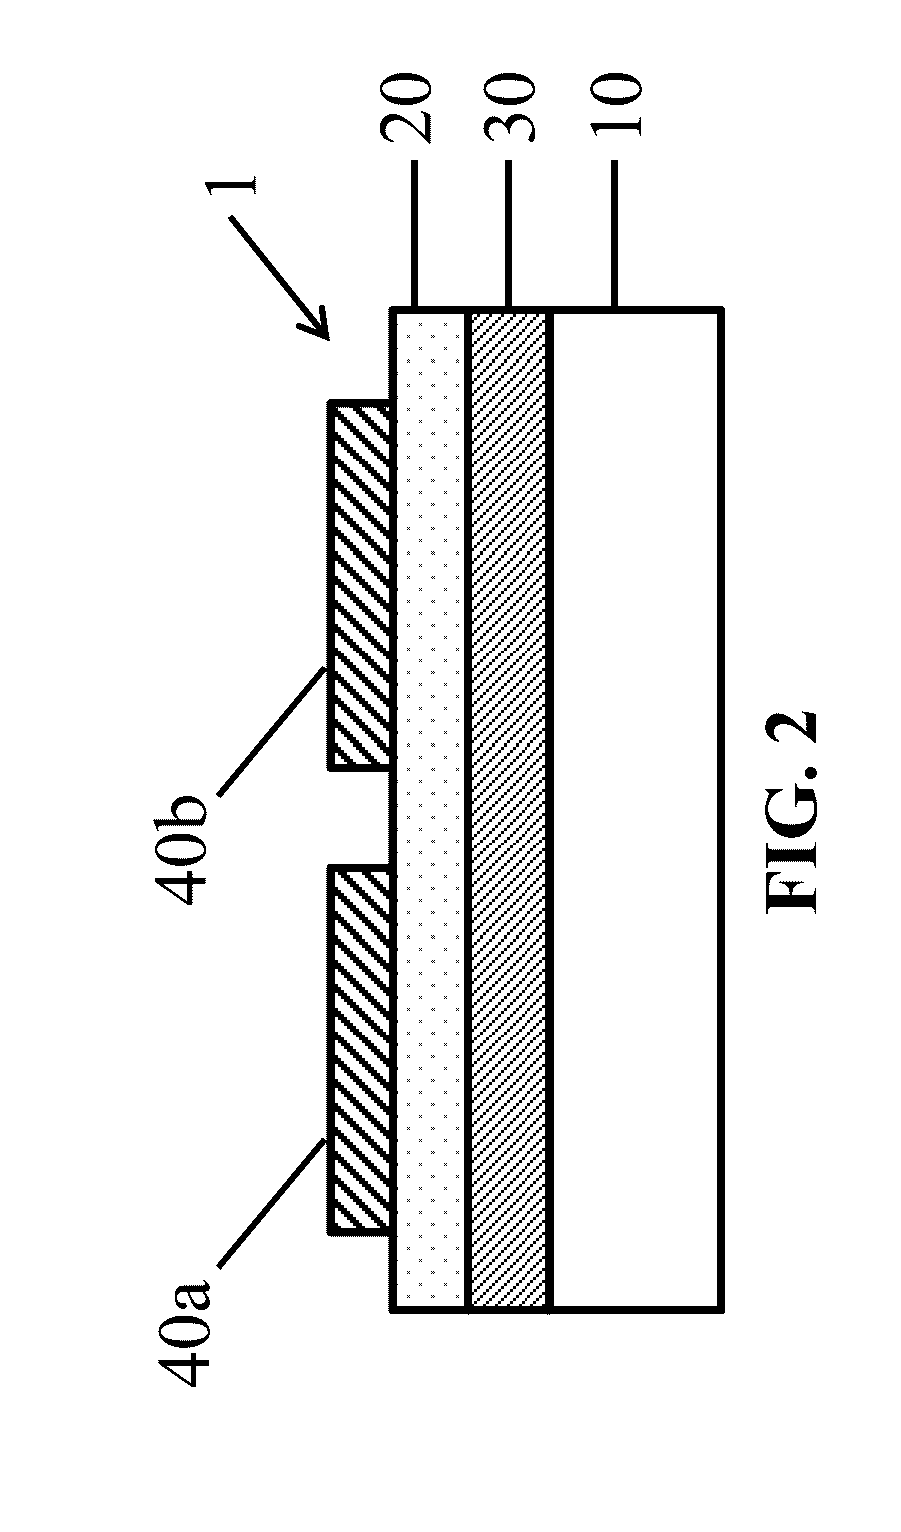 Coated stacks for batteries and related manufacturing methods